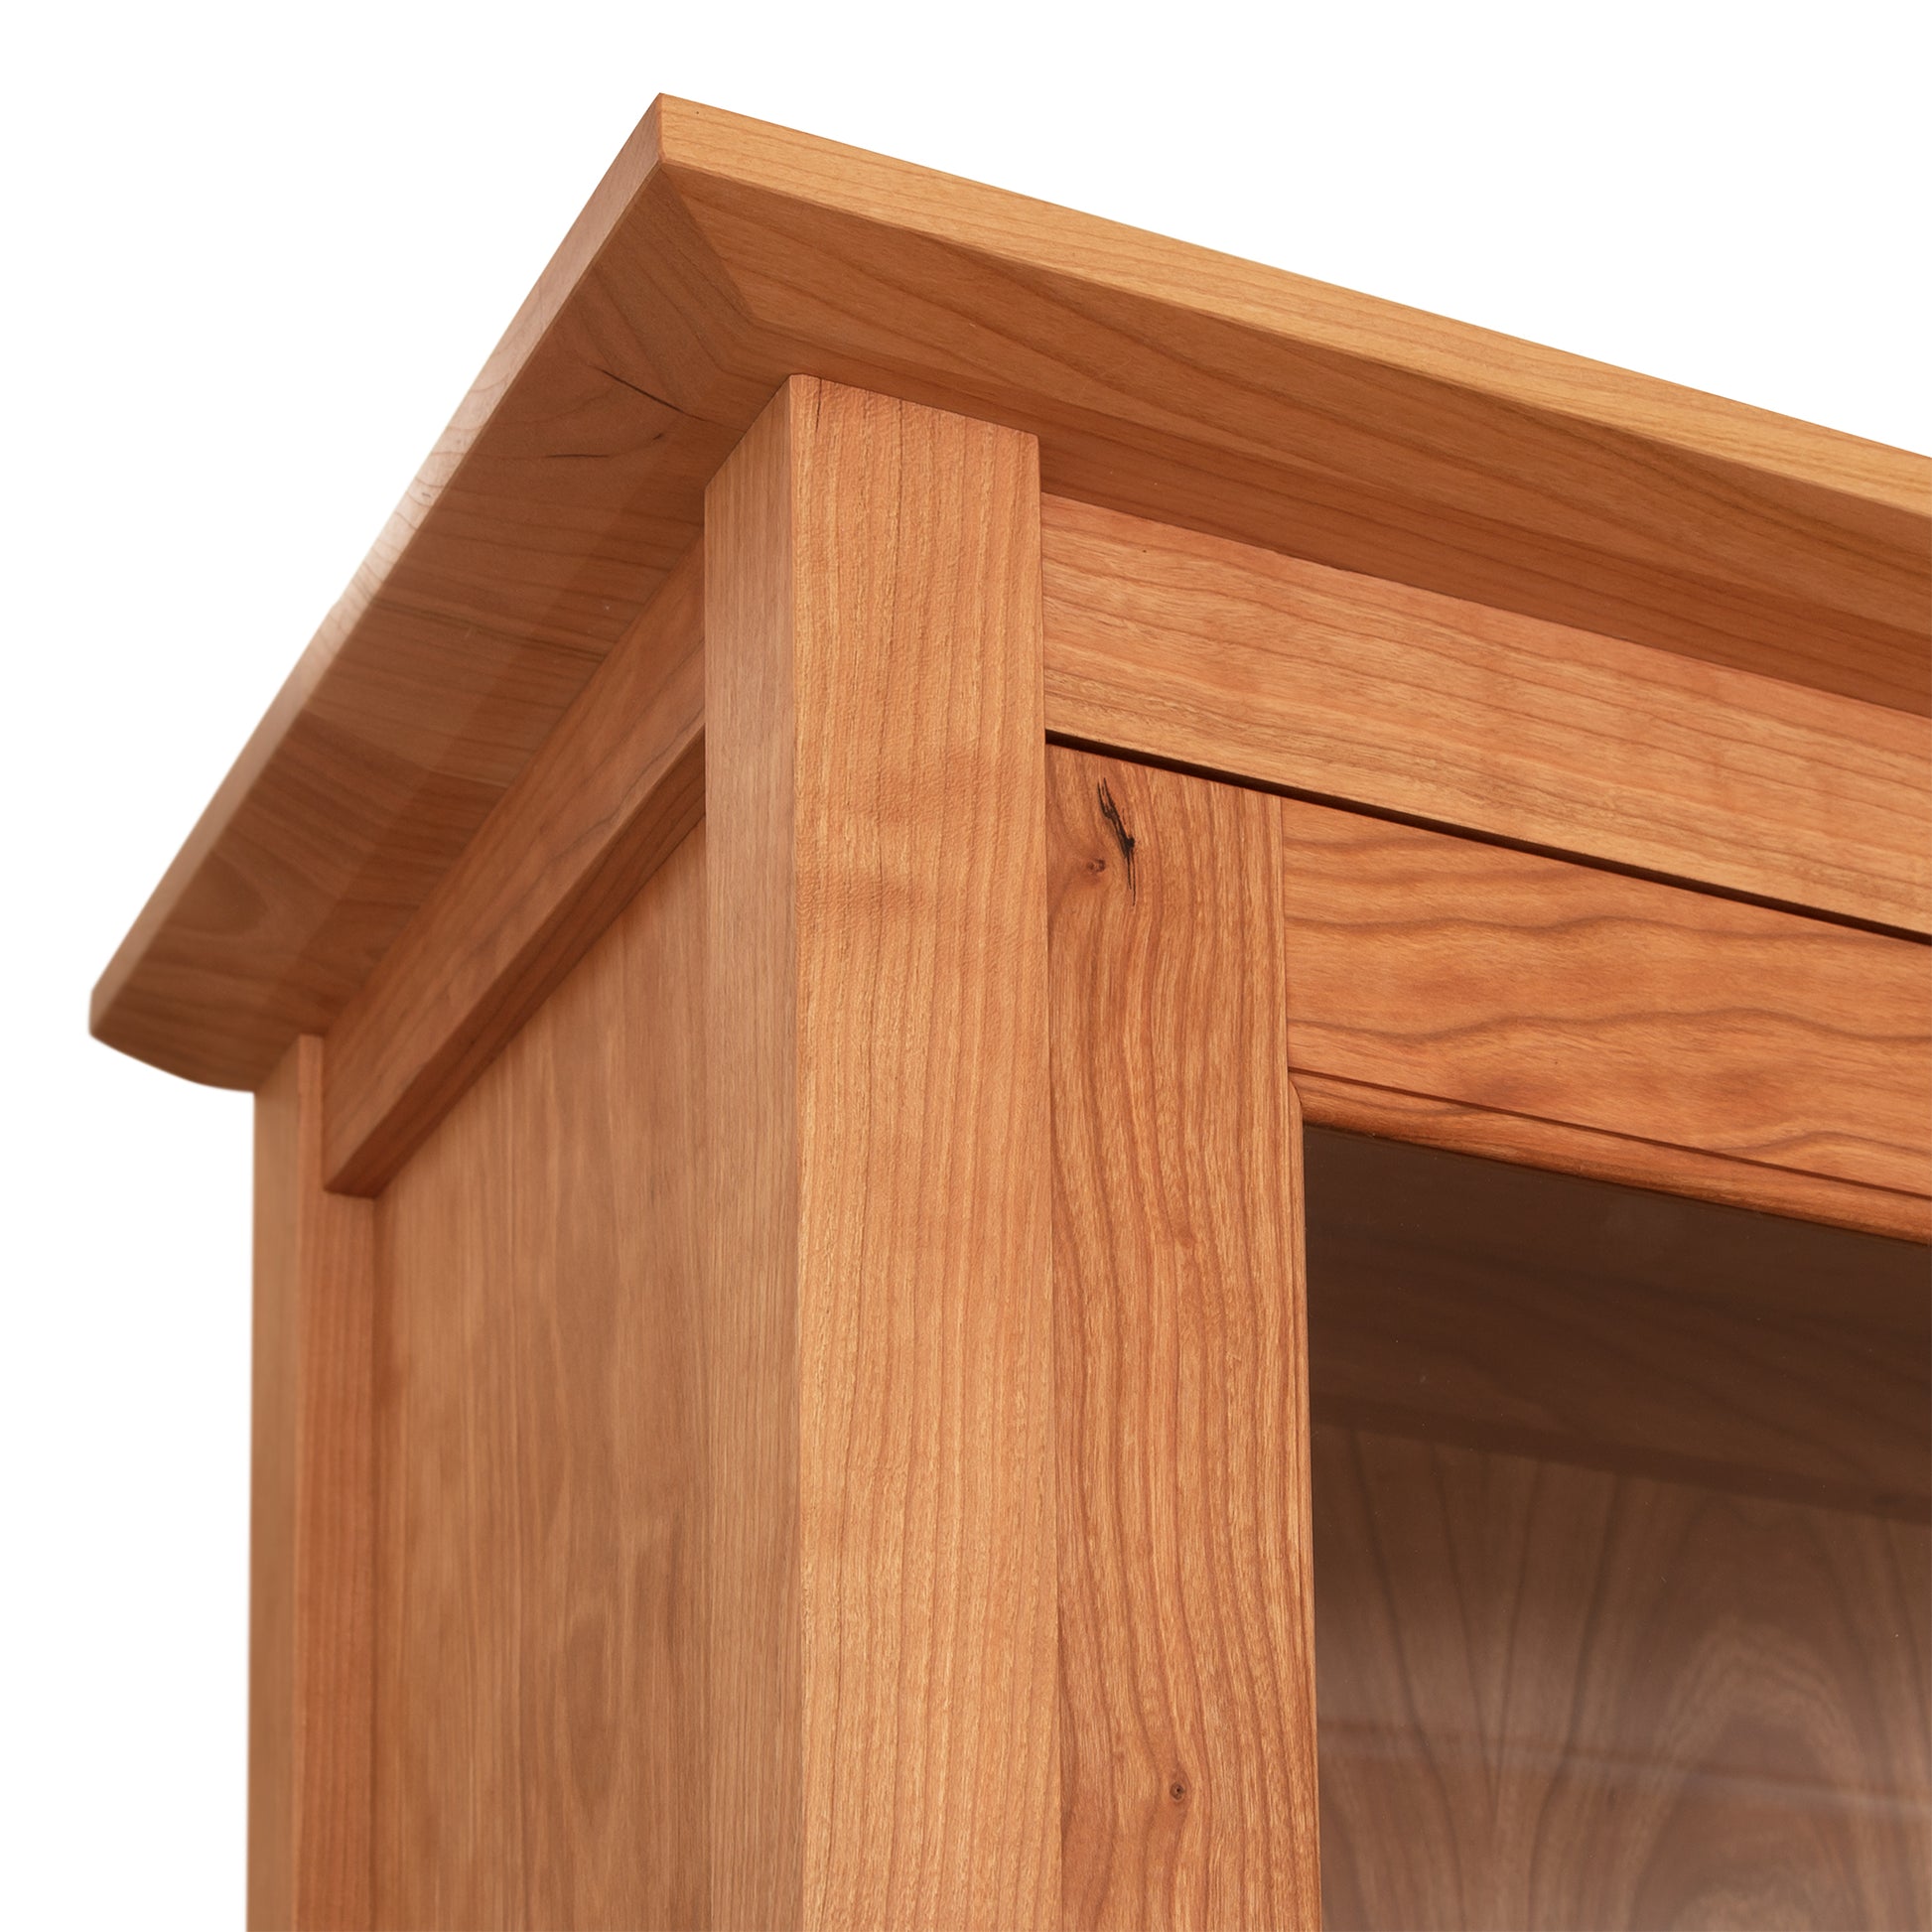 A close-up of a Maple Corner Woodworks American Shaker 50" China Cabinet corner showing the grain pattern and joinery.